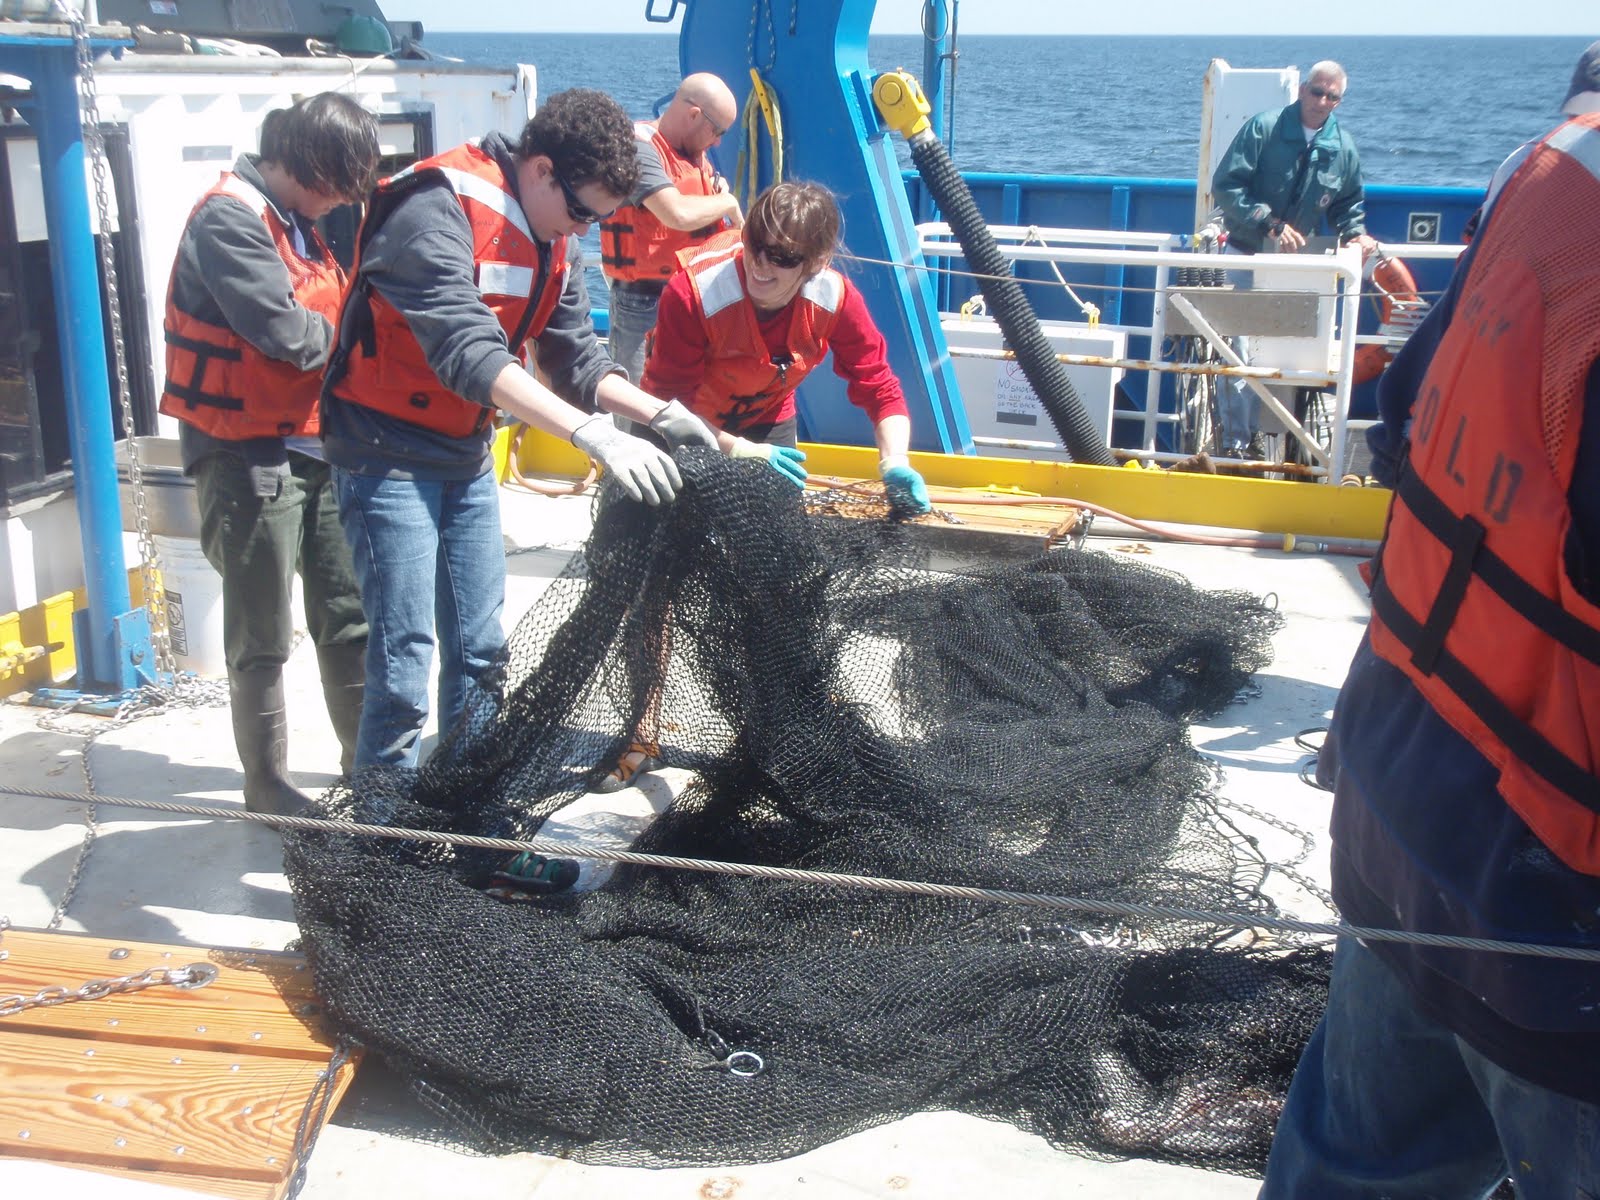 Jenna and Mandy combing through the trawl net on deck